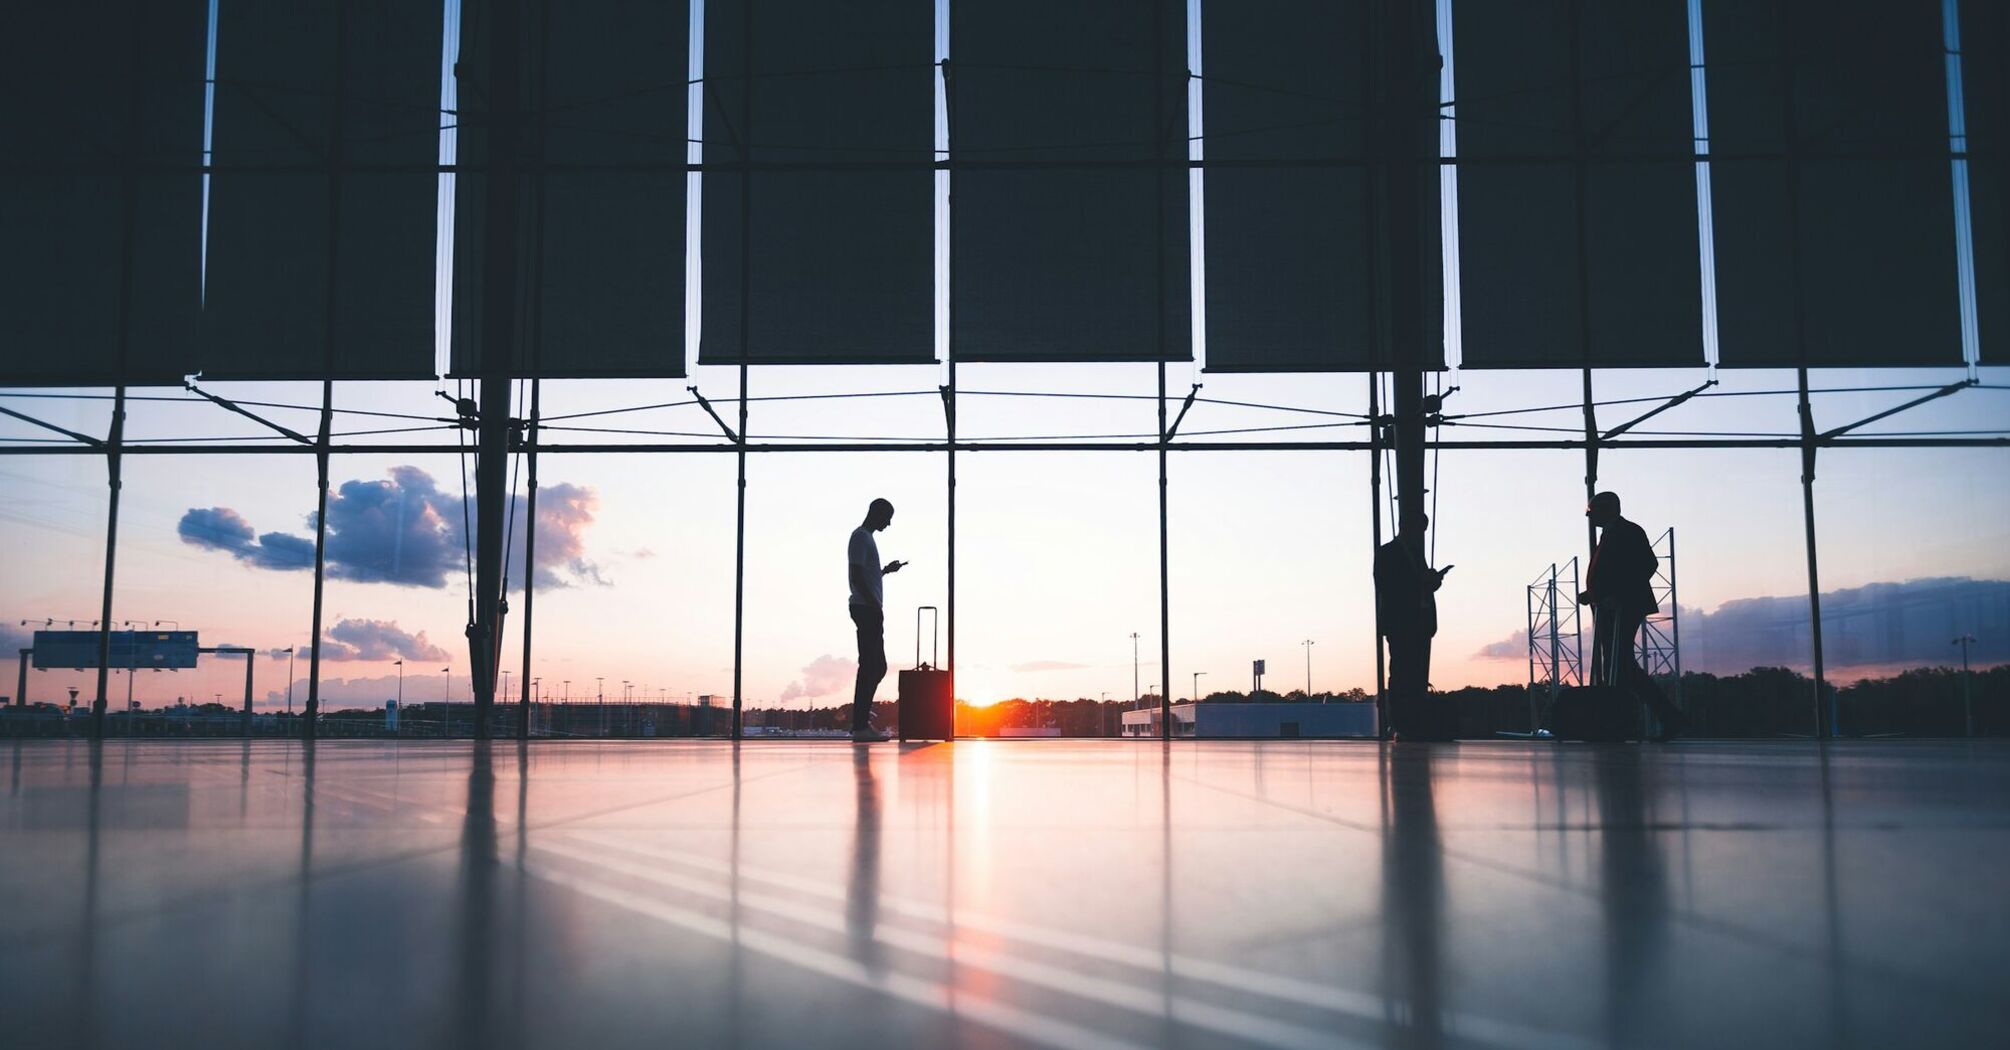 Silhouettes of travelers at an airport during sunset